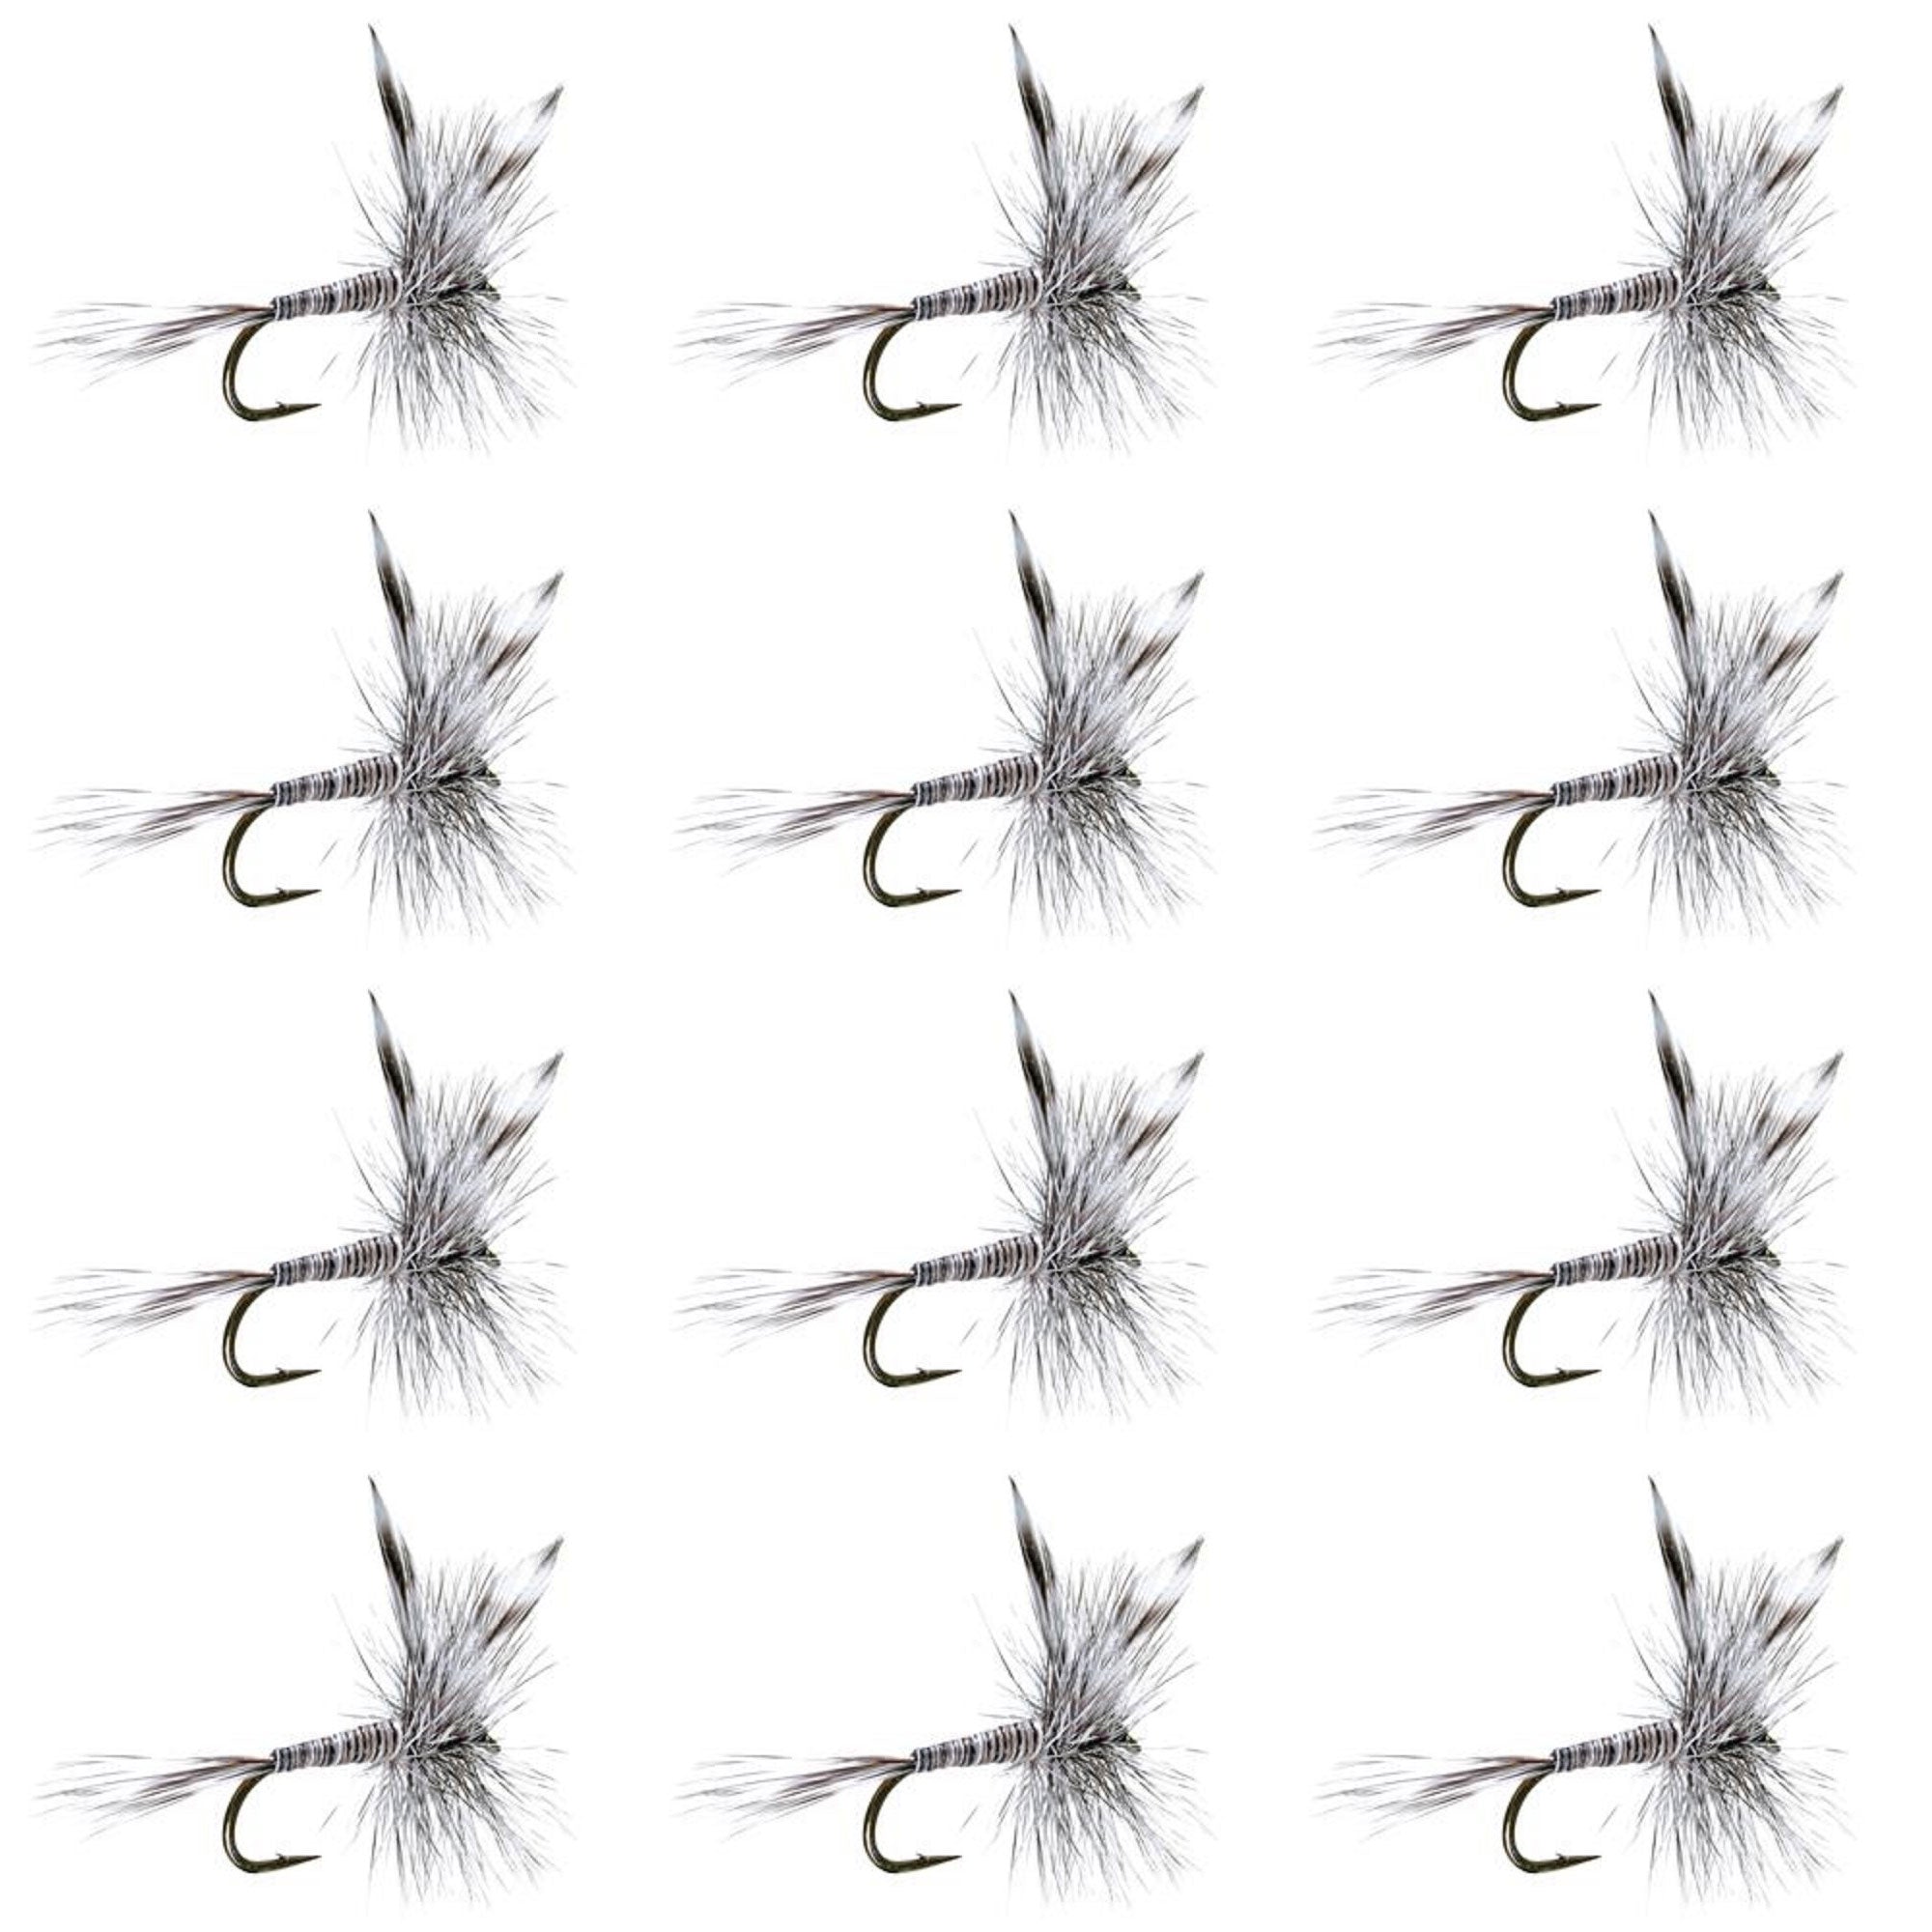 Mosquito Classic Trout Dry Fly Fishing Flies - 1 Dozen Size 16